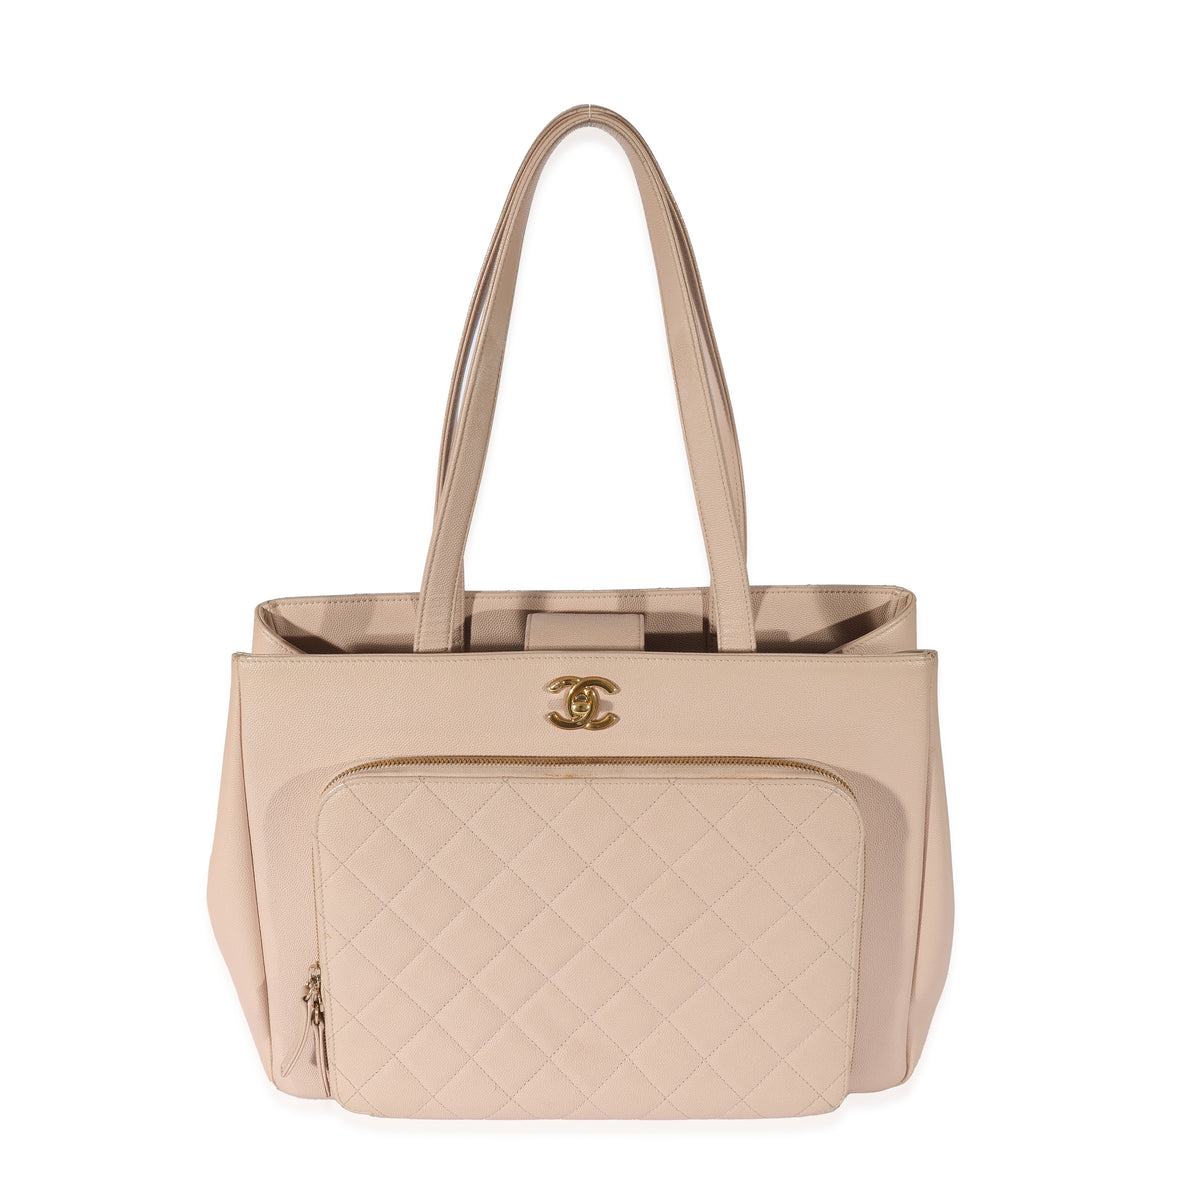 Chanel Business Affinity Shopping Tote, Chanel Handbags